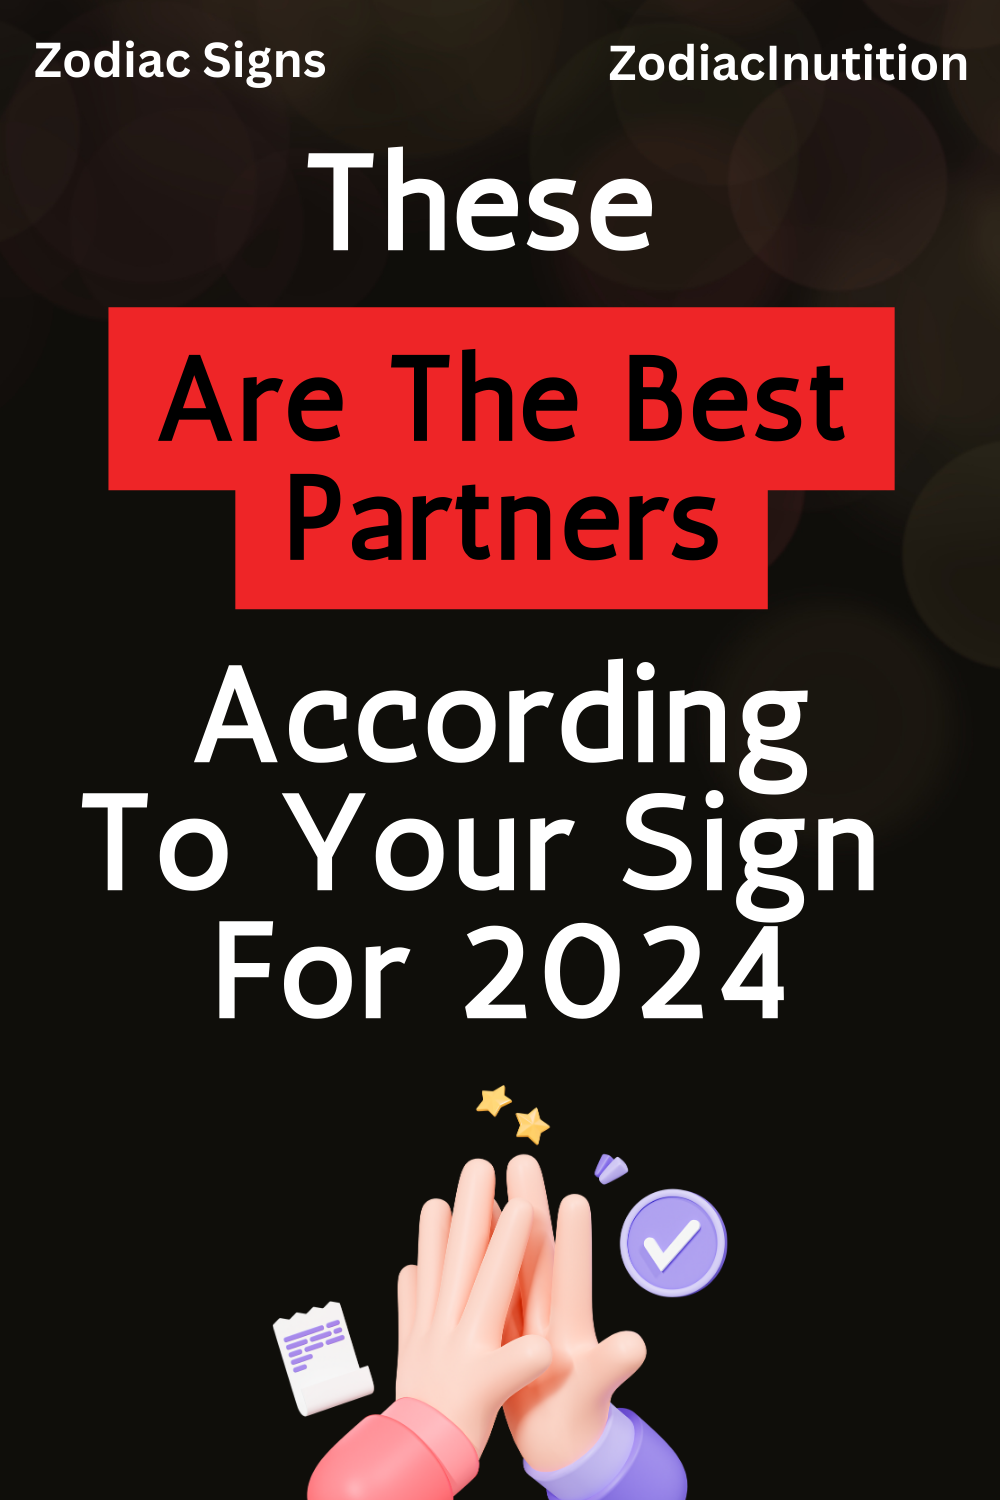 These Are The Best Partners According To Your Sign For 2024